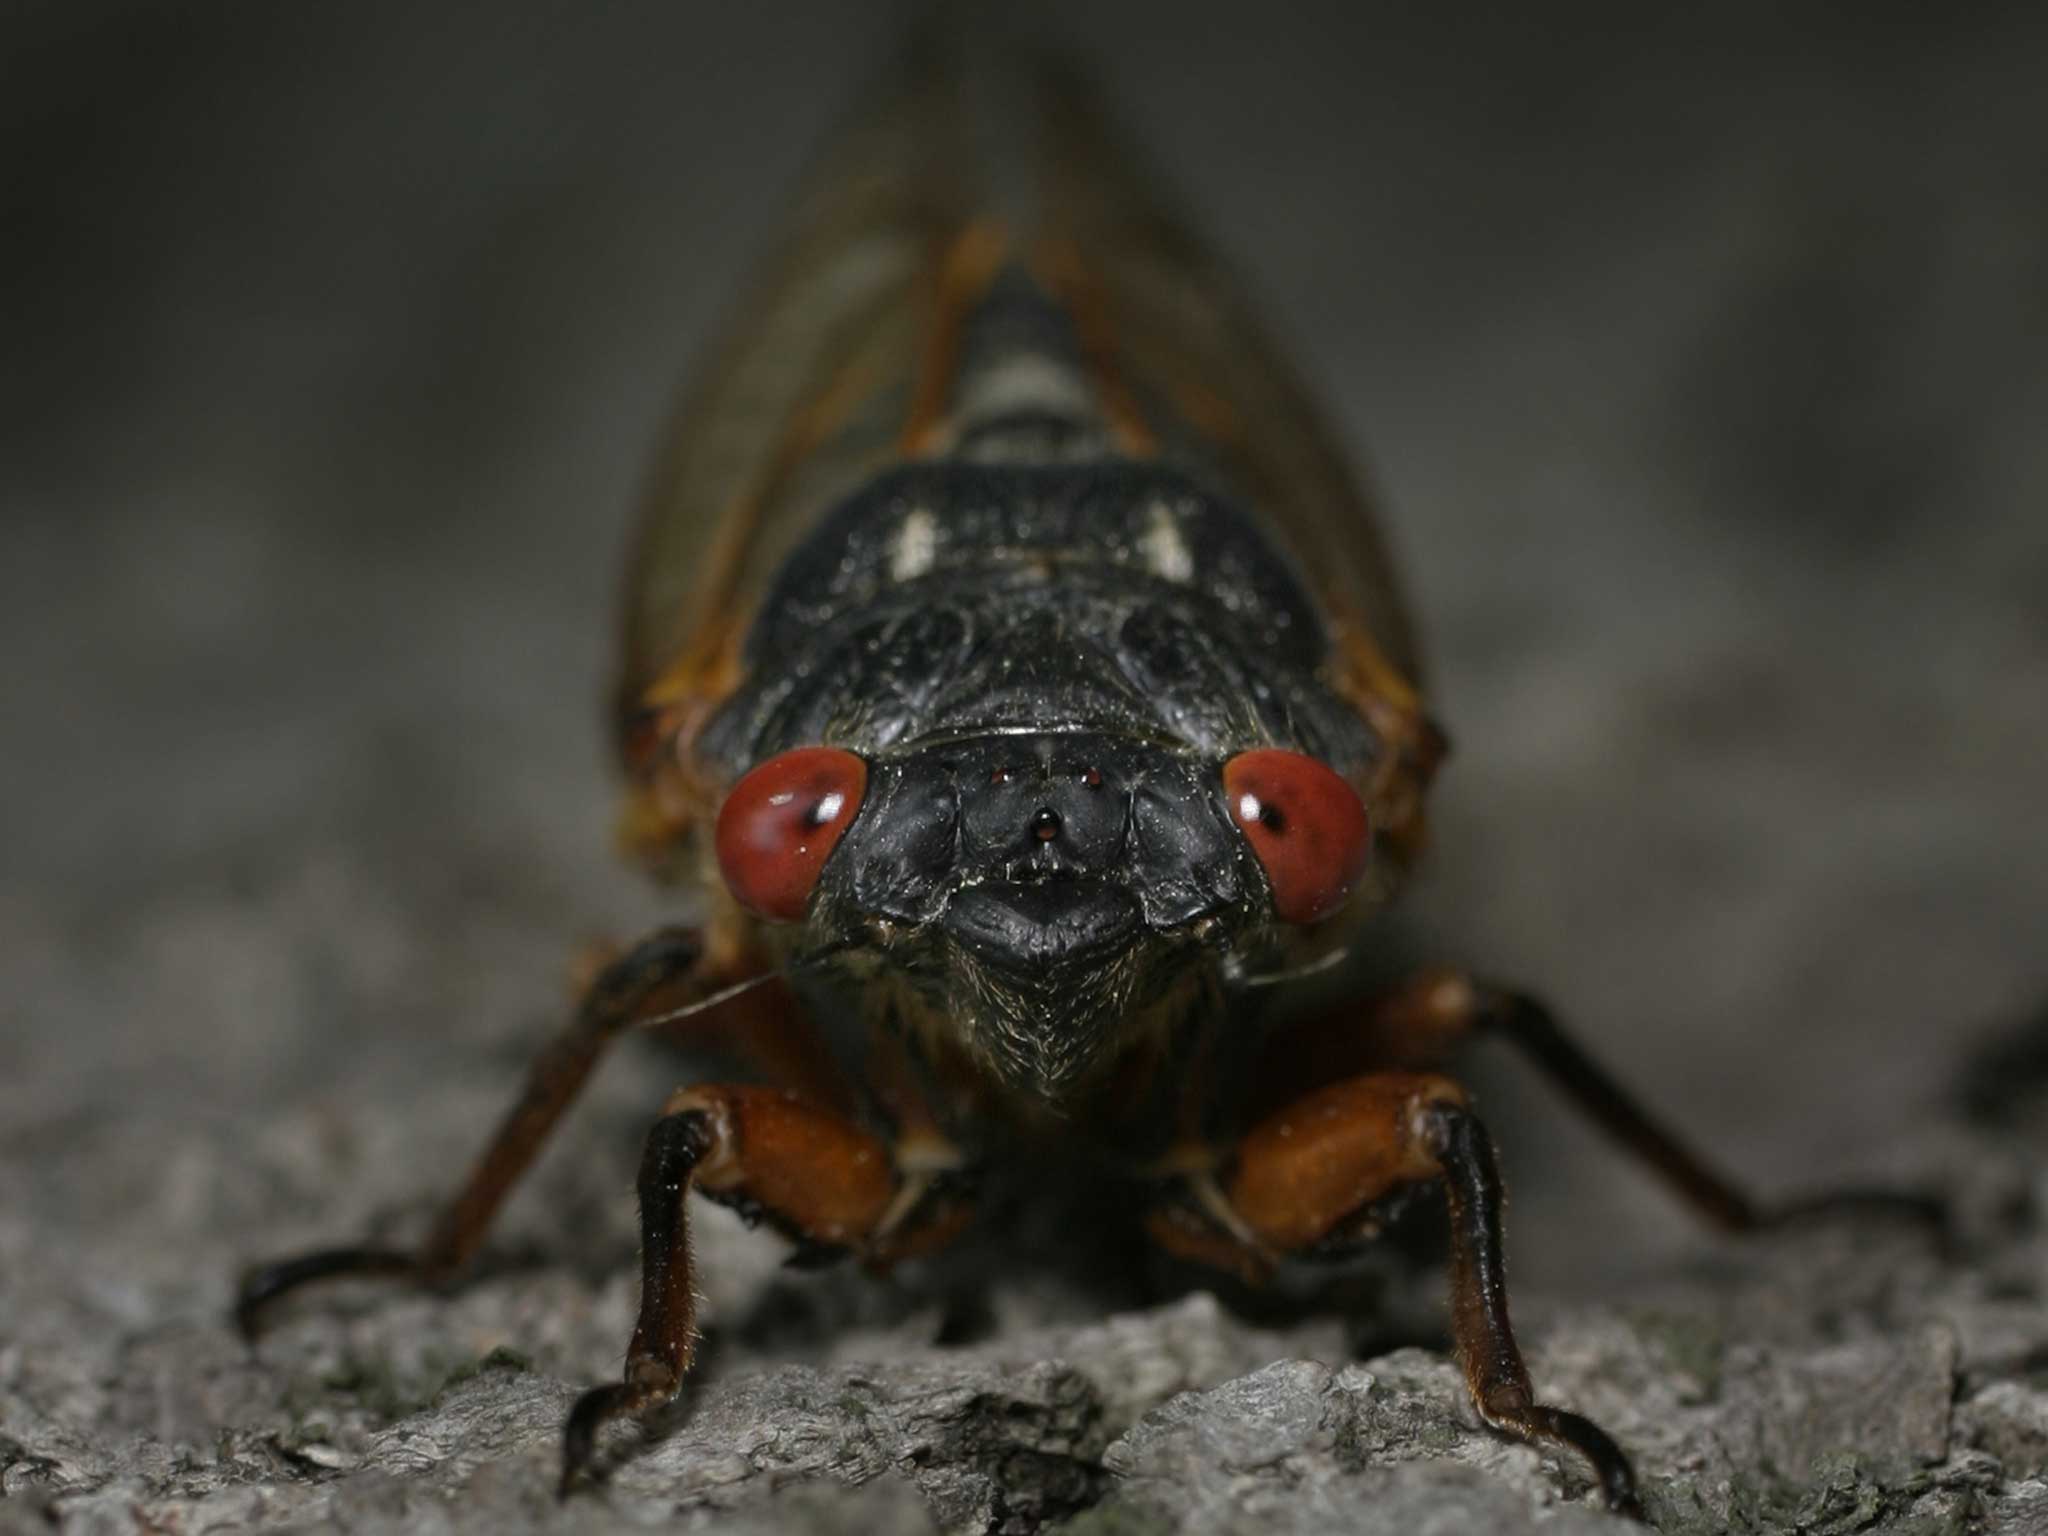 Concerns about cicadas have caused a Washington, DC wine bar to close for a month